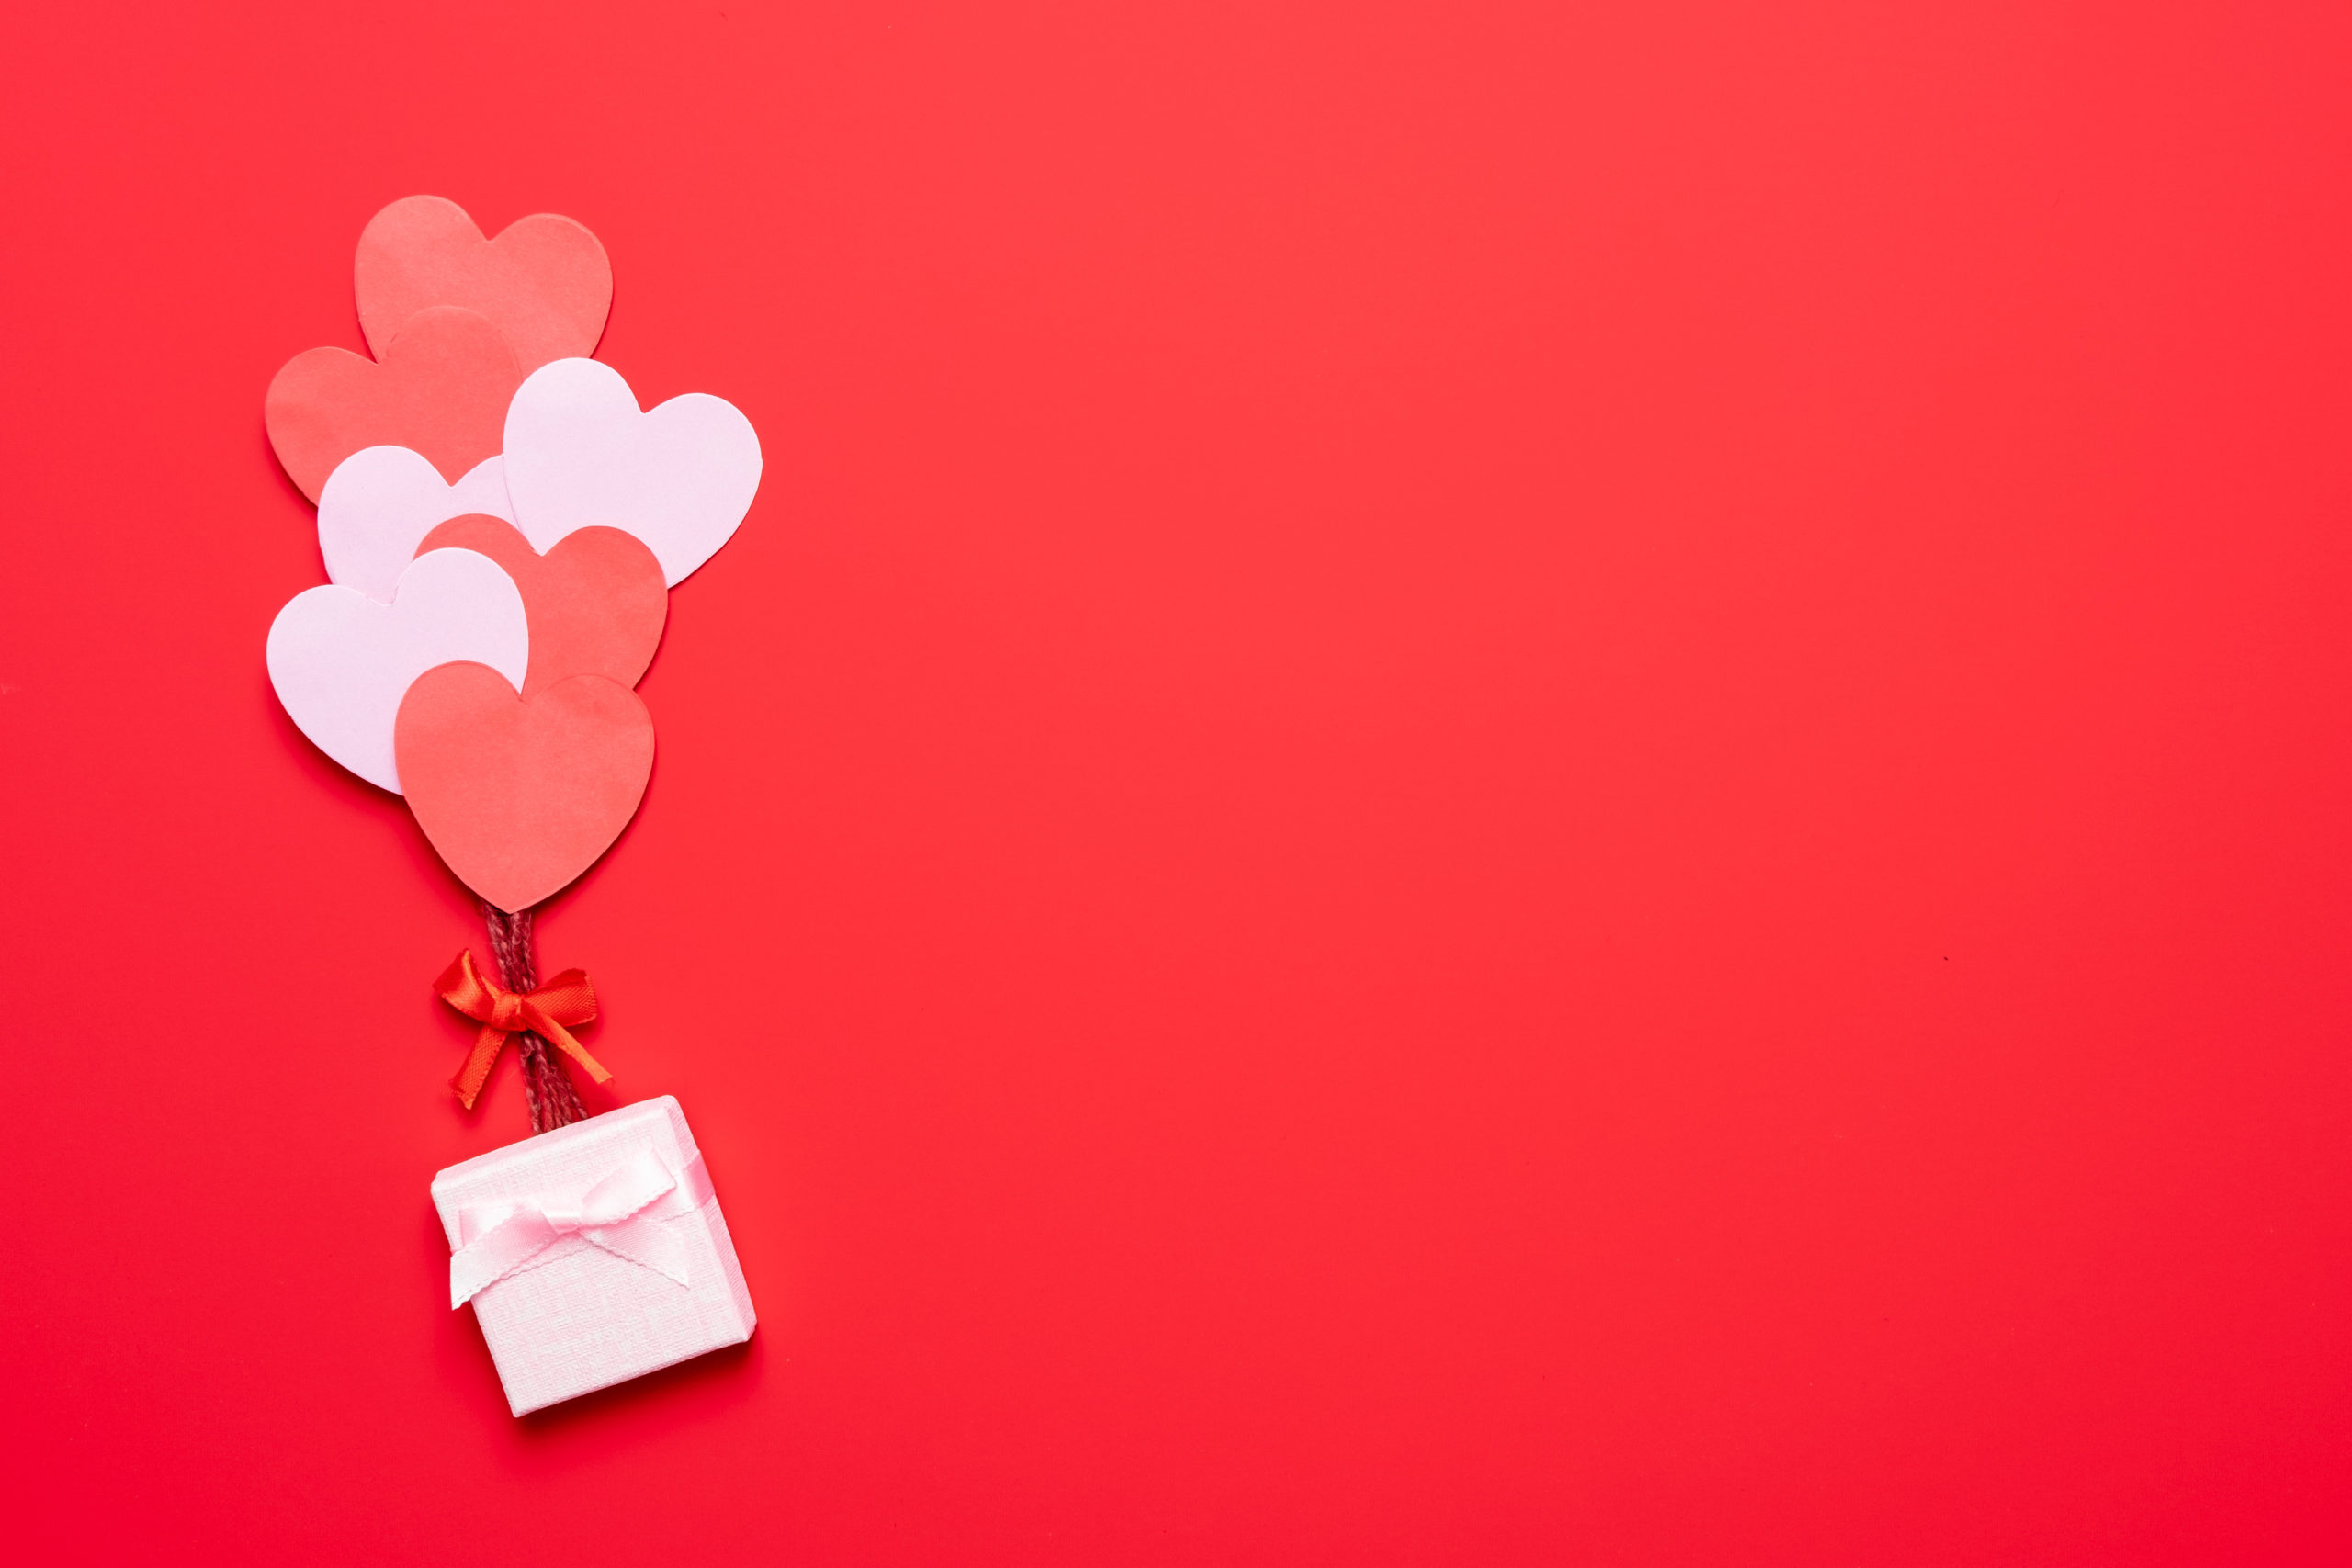 Red background with balloon hearts lifting a pink present